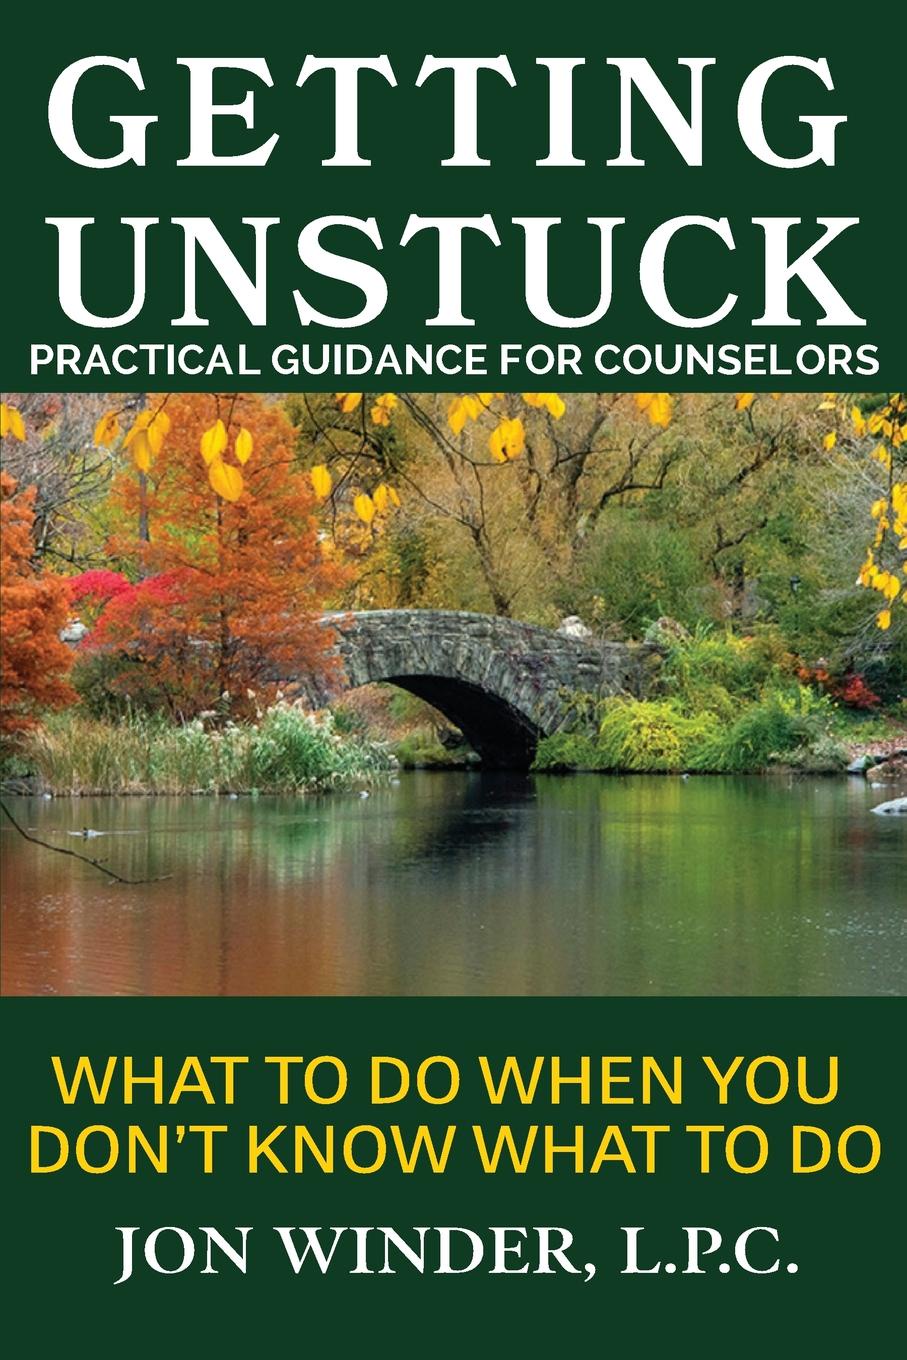 Getting Unstuck. Practical Guidance for Counselors: What to Do When You Don.t Know What to Do